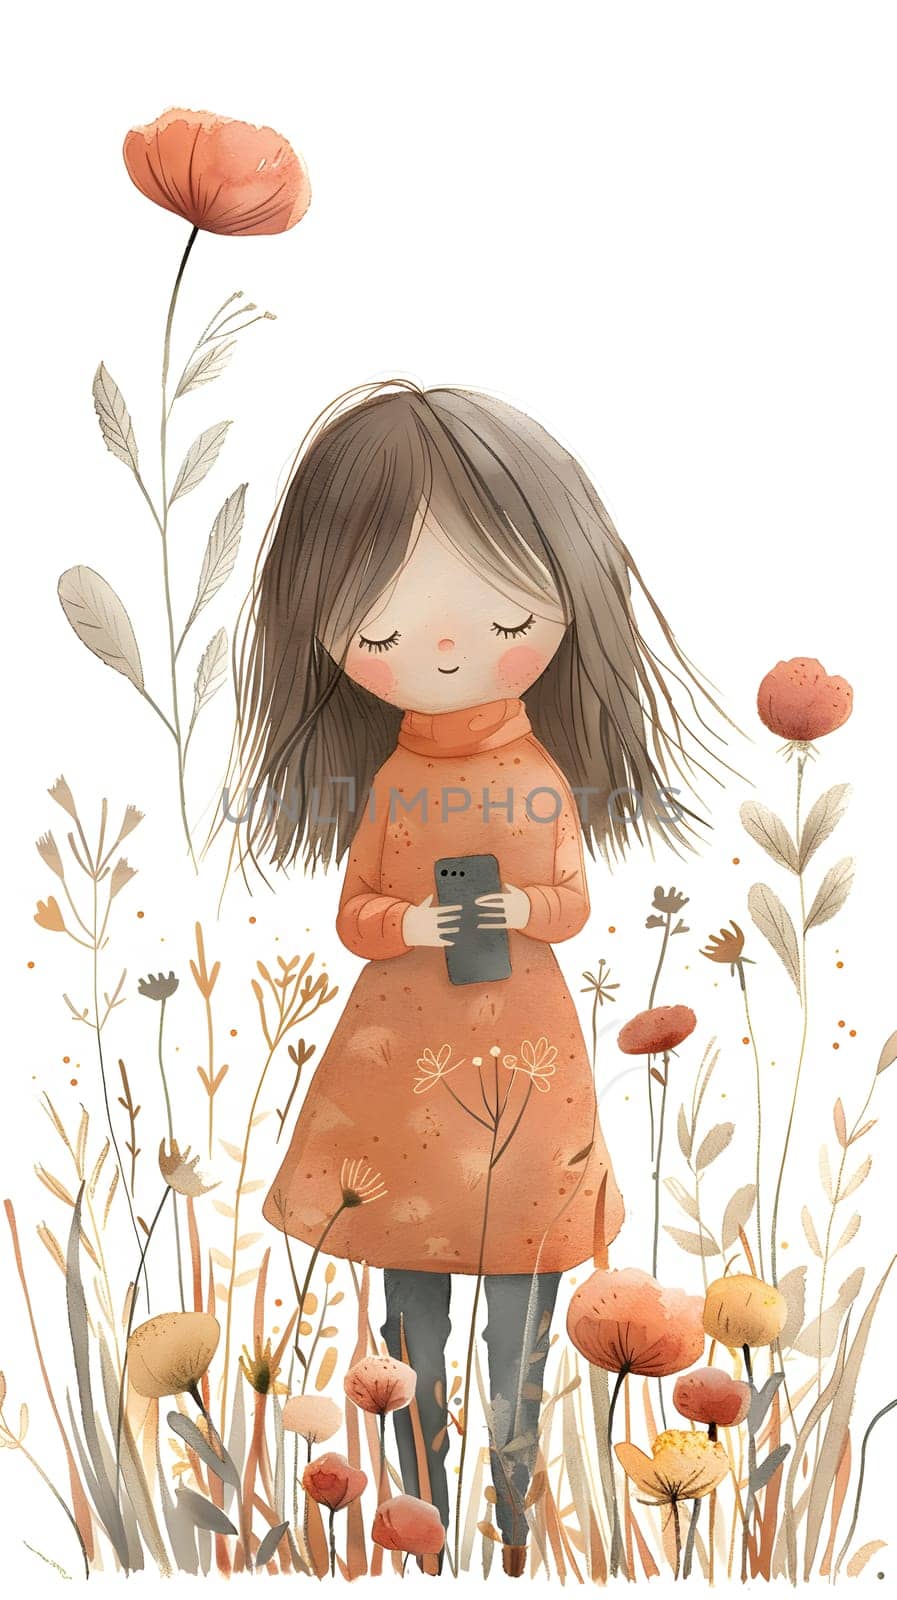 Little girl with brown hair holding toy cell phone in flower field by Nadtochiy